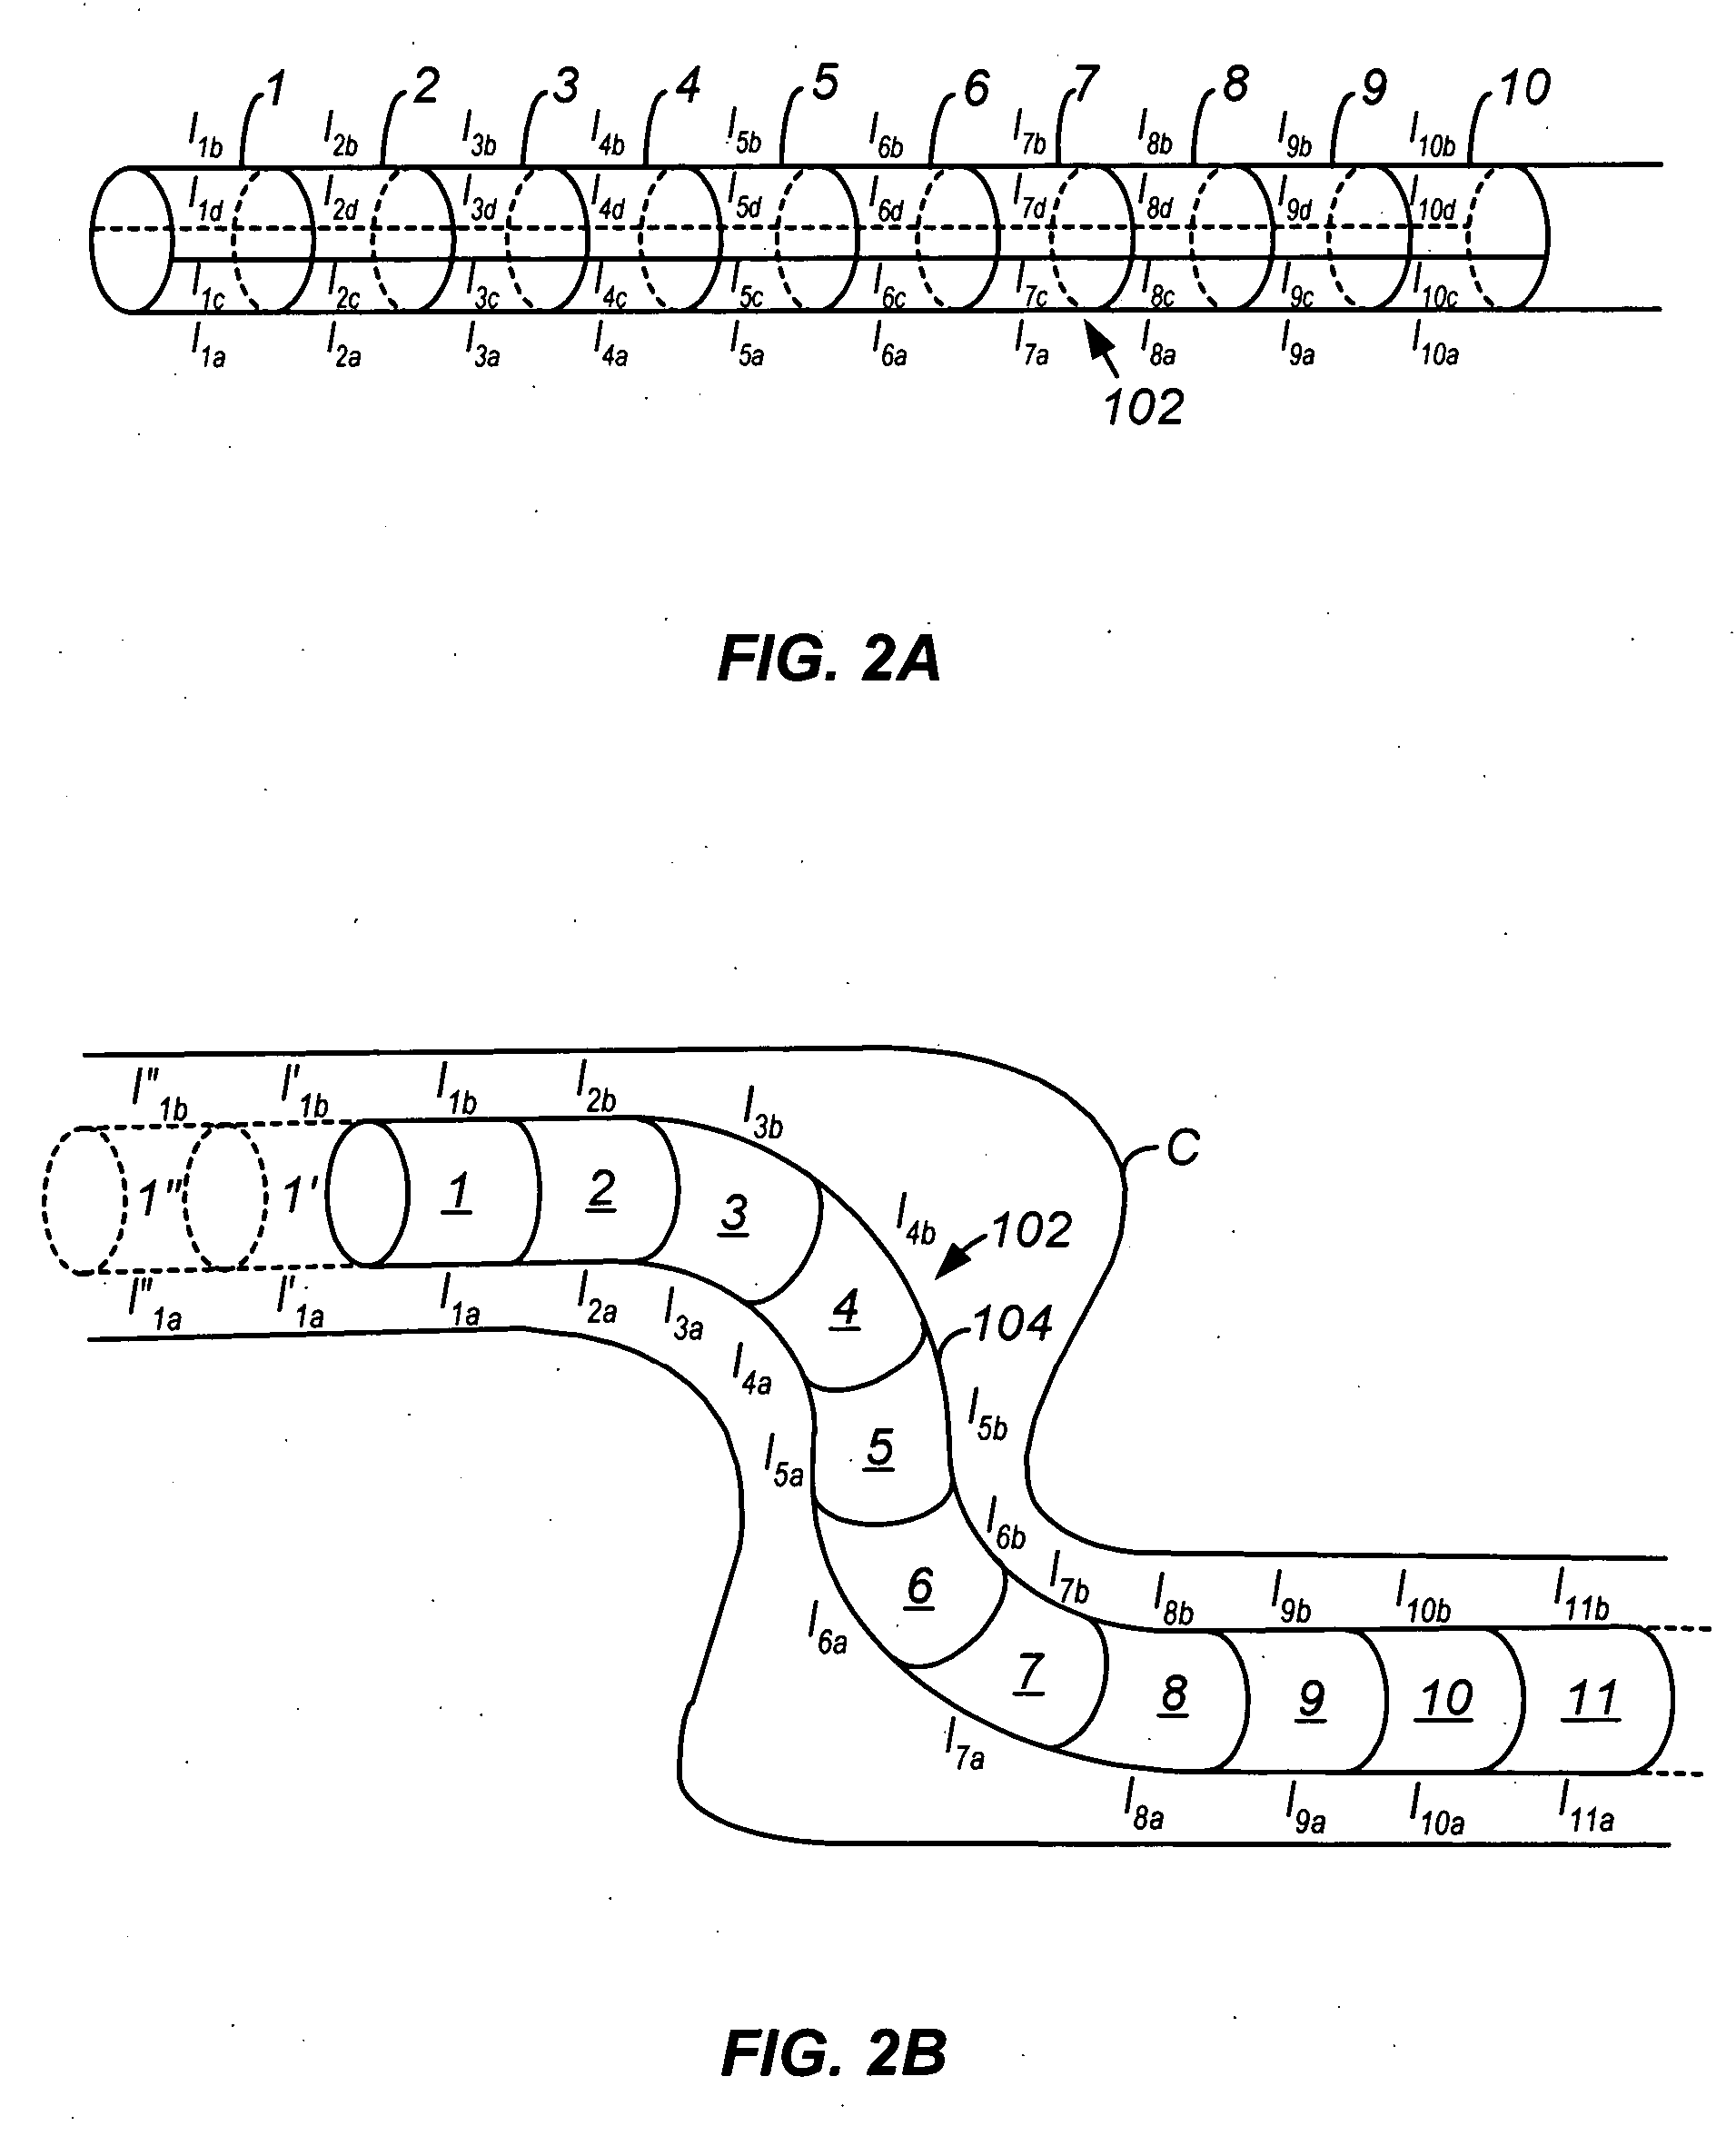 Apparatus and methods for facilitating treatment of tissue via improved delivery of energy based and non-energy based modalities